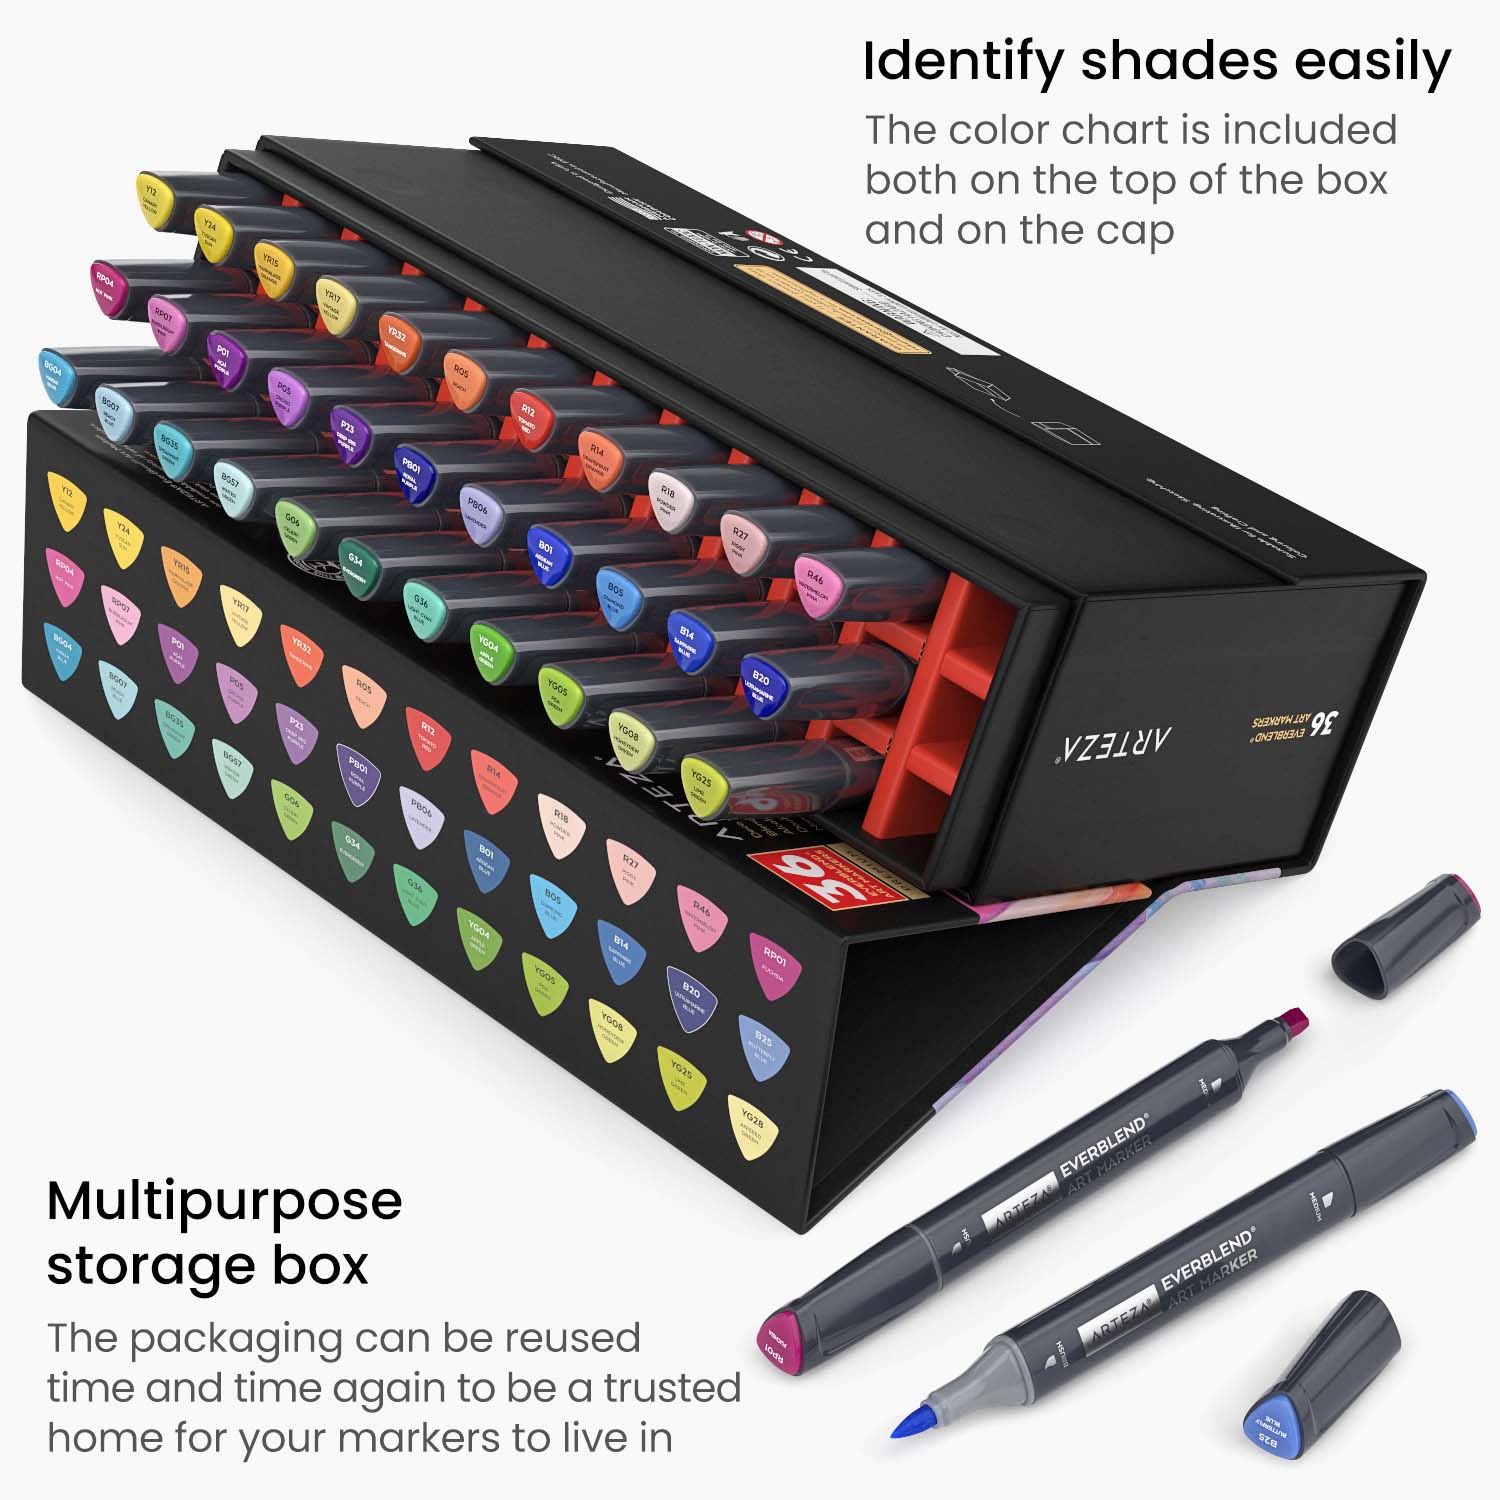 Arteza Everblend Markers — The Art Gear Guide